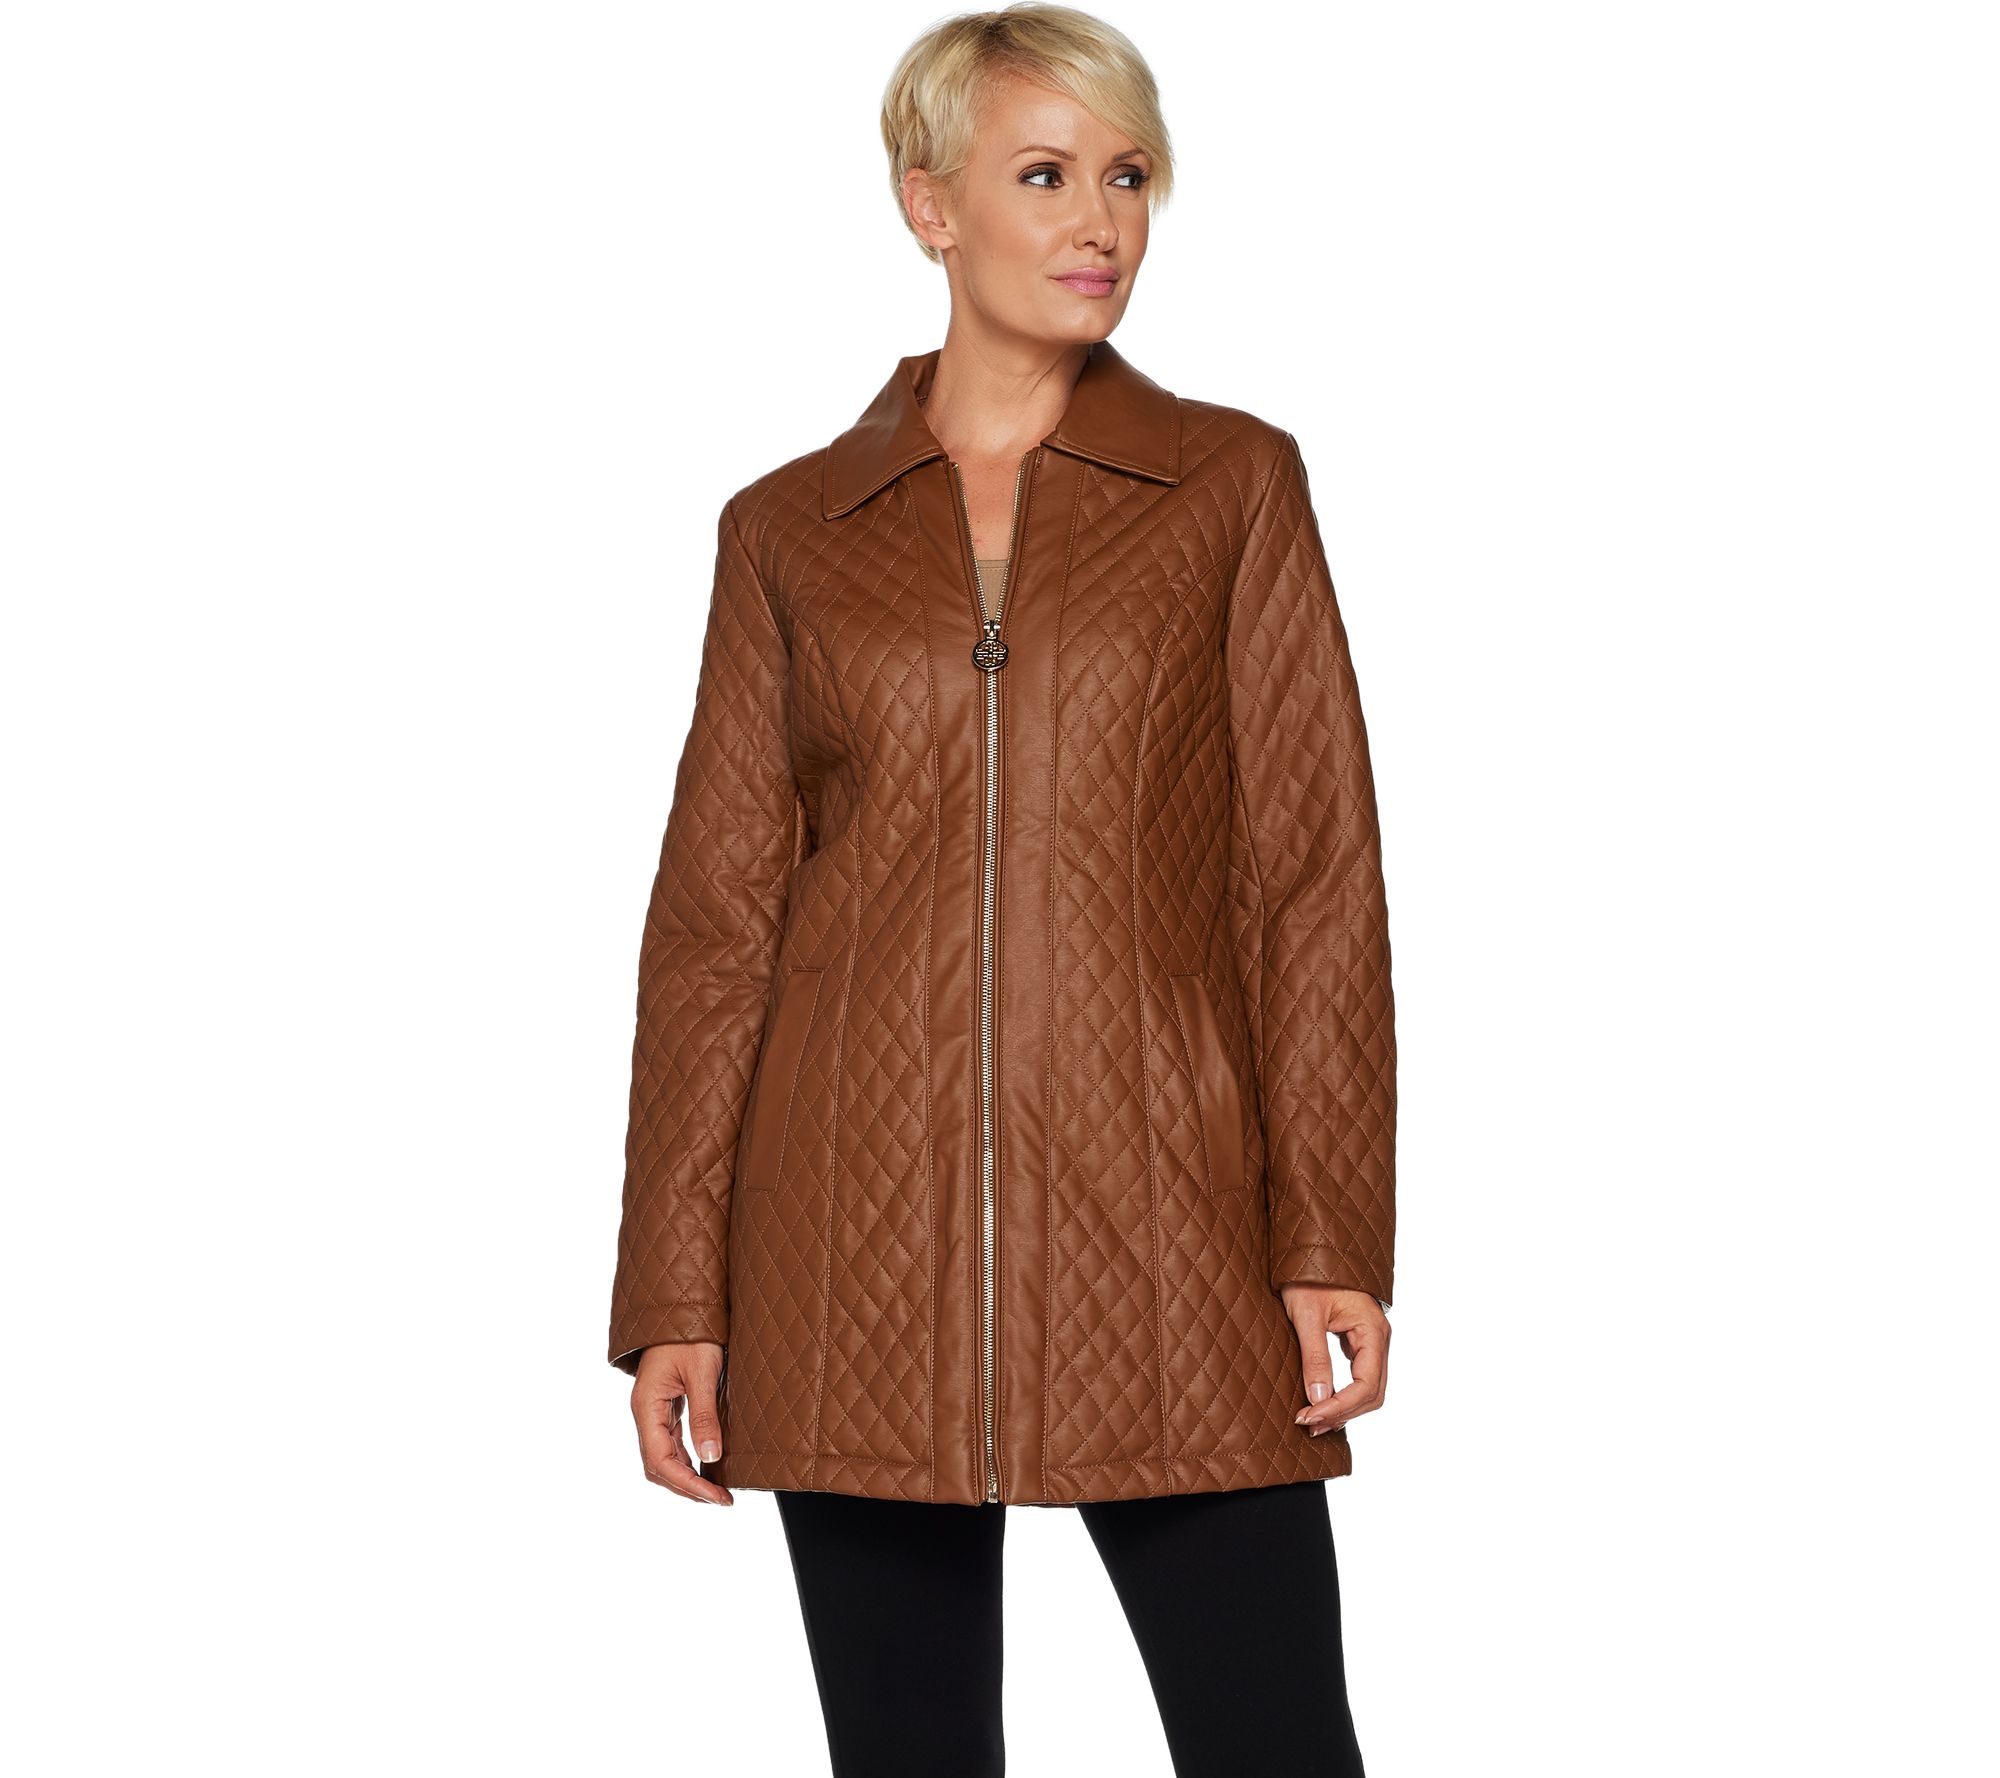 Dennis Basso Diamond Quilted Faux Leather Zip Front Jacket - QVC.com